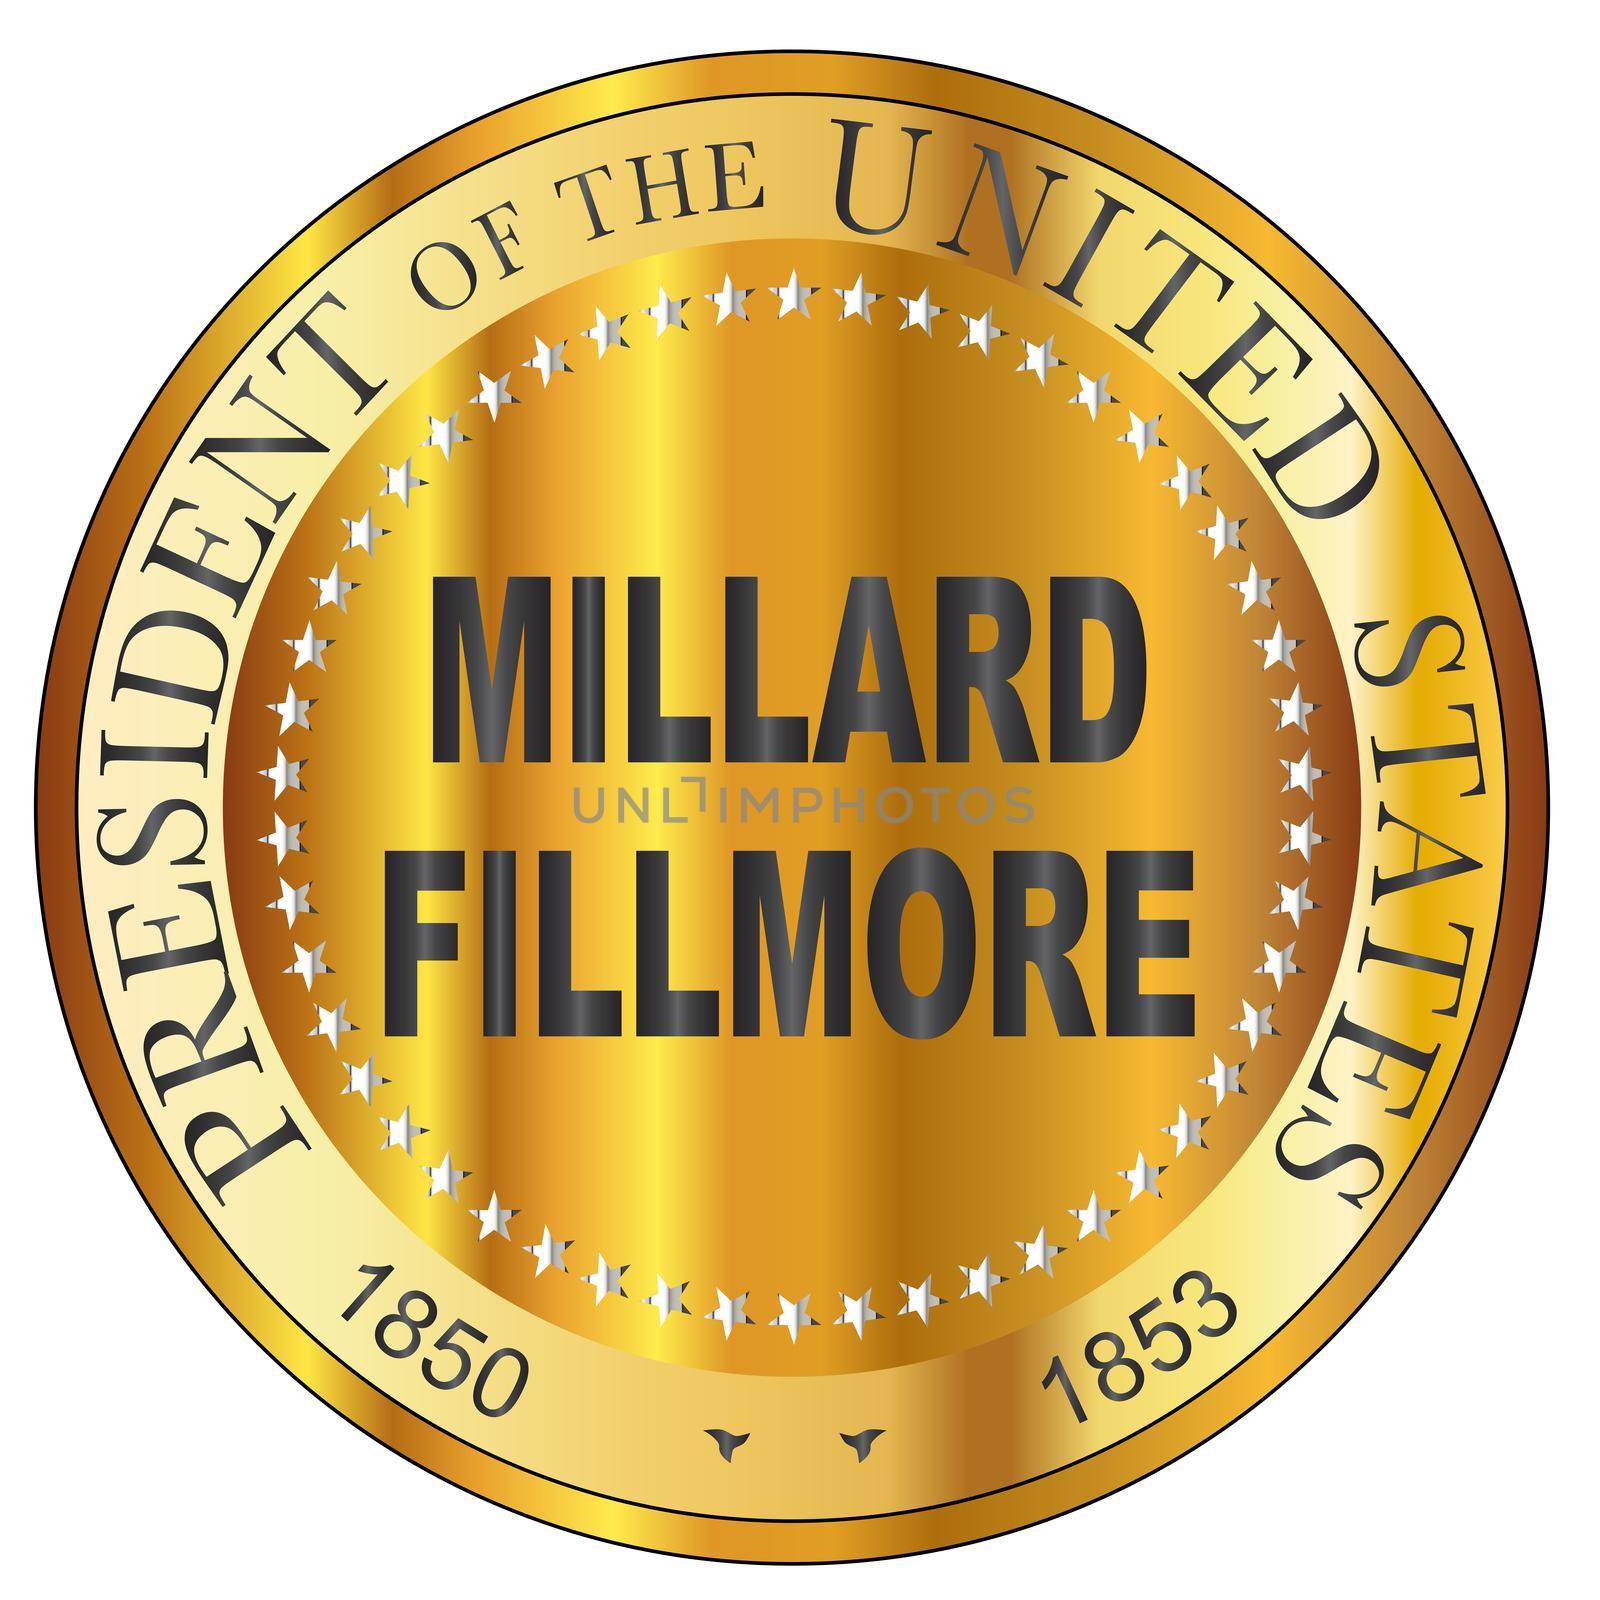 Millard Fillmore 13th president of the United States of America round stamp